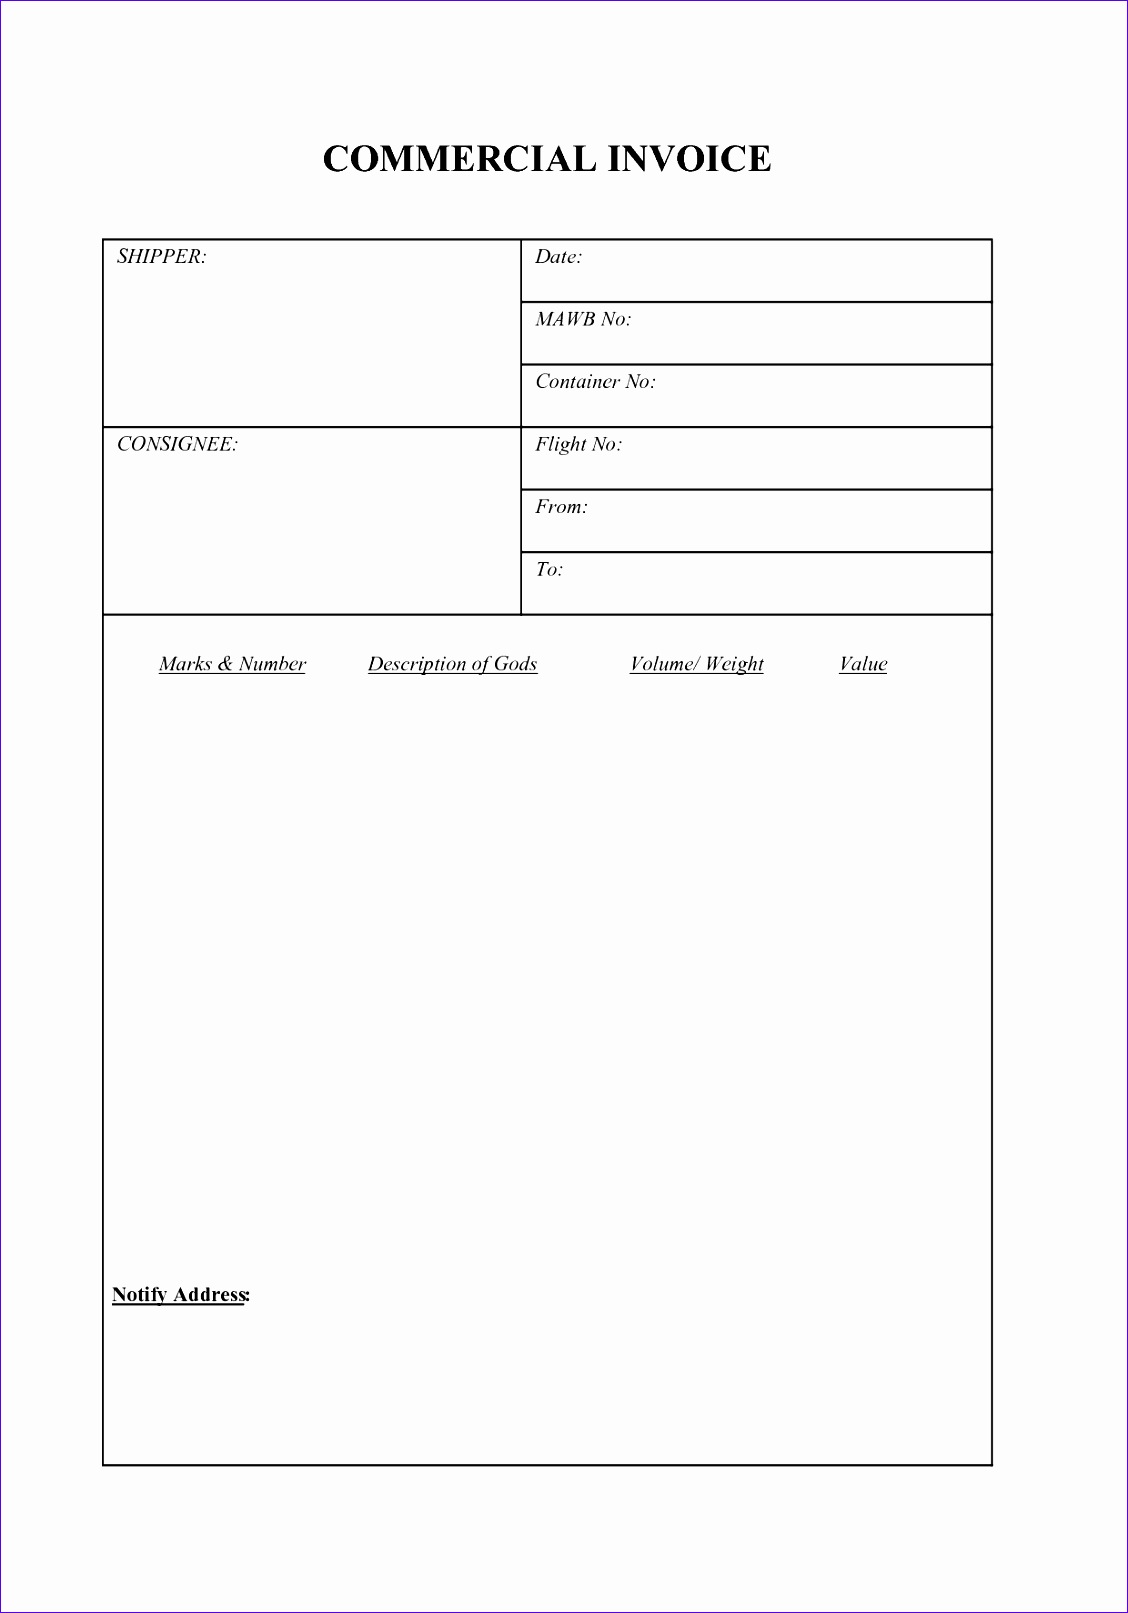 tnt mercial invoice template 411 11281613